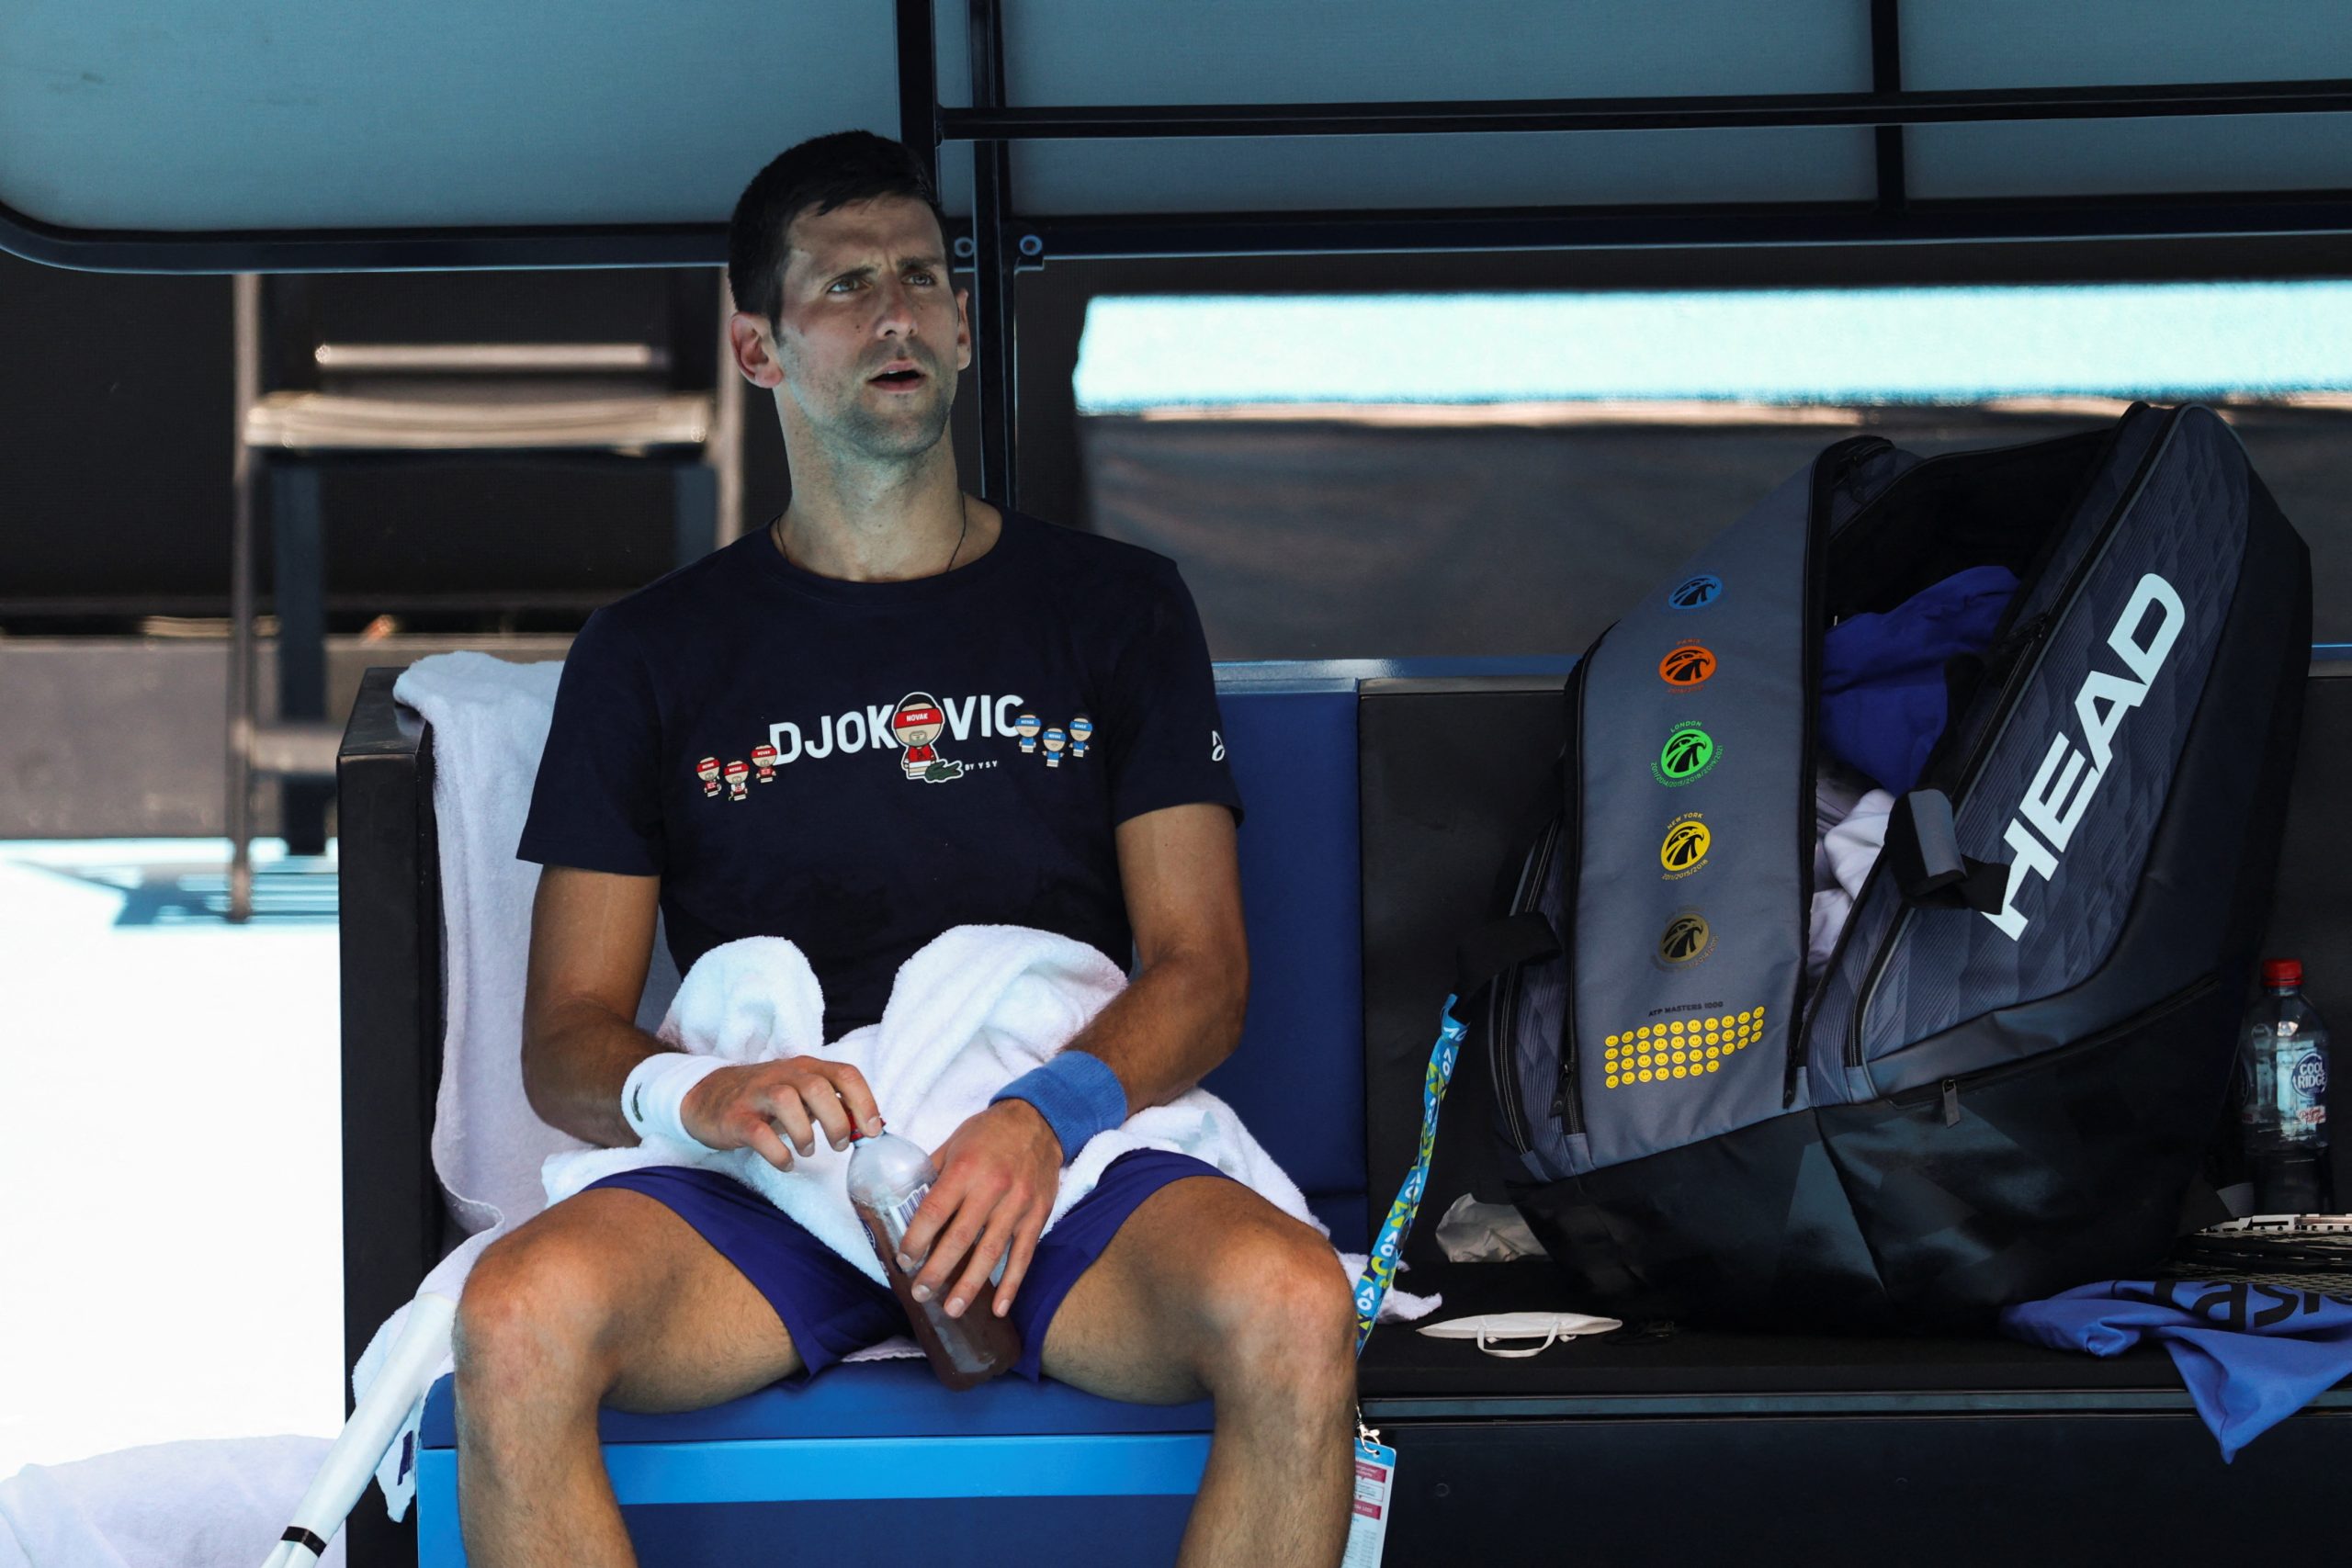 Djokovic admitted that he had made a mistake and that his participation in the Australian Championship was still pending.